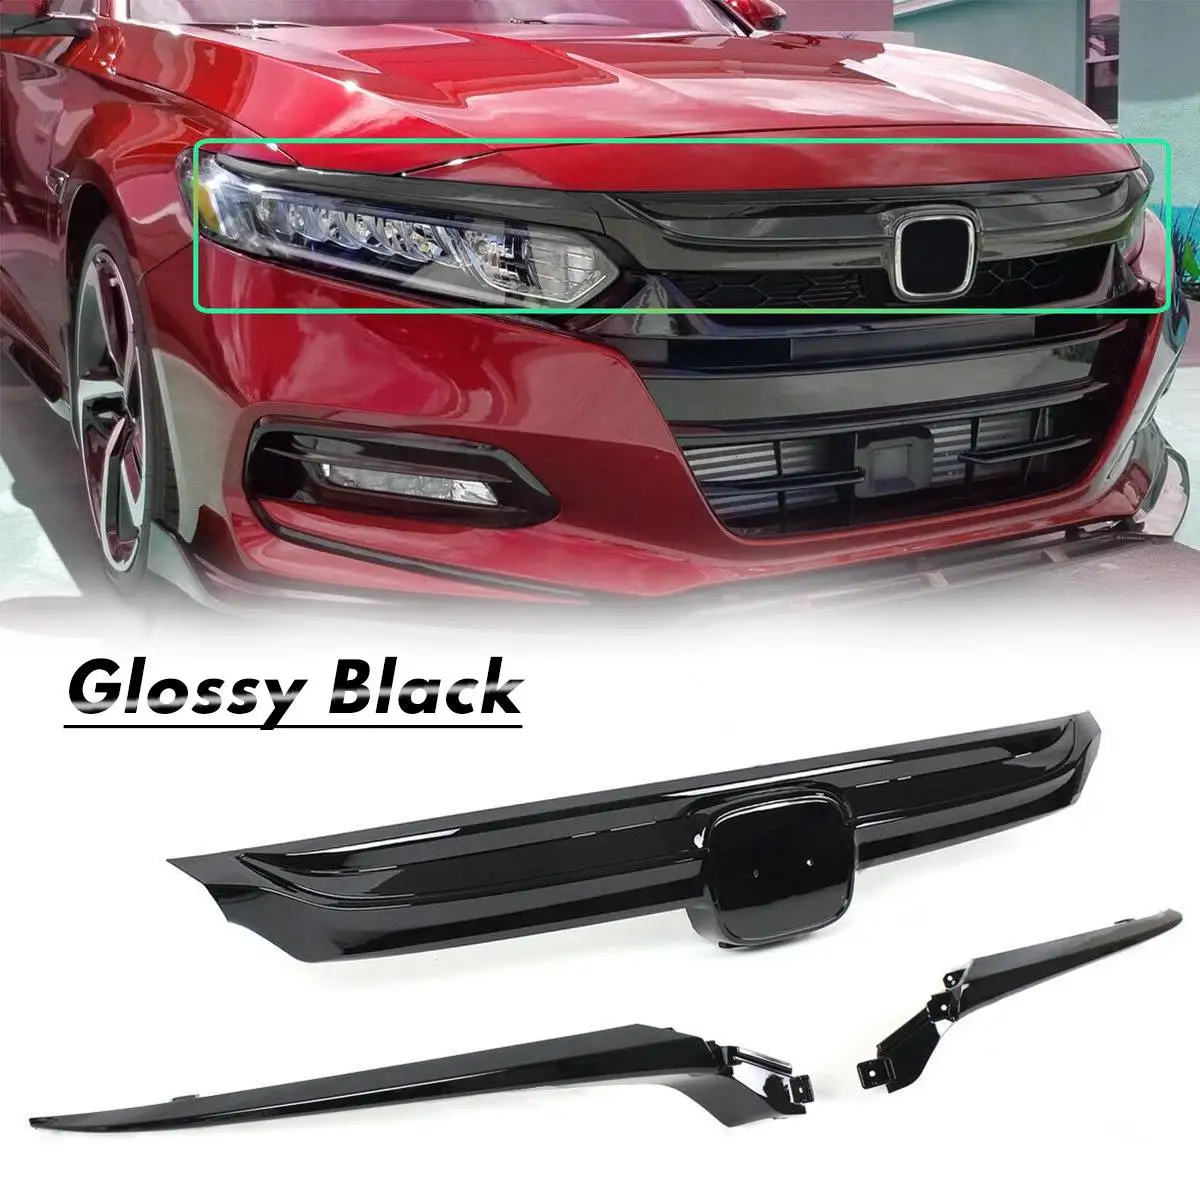 

Front Grille Glossy Black Grille Cover Replacement Base Moulding Trim For Honda For Accord Sedan 10th Gen 2018-2019